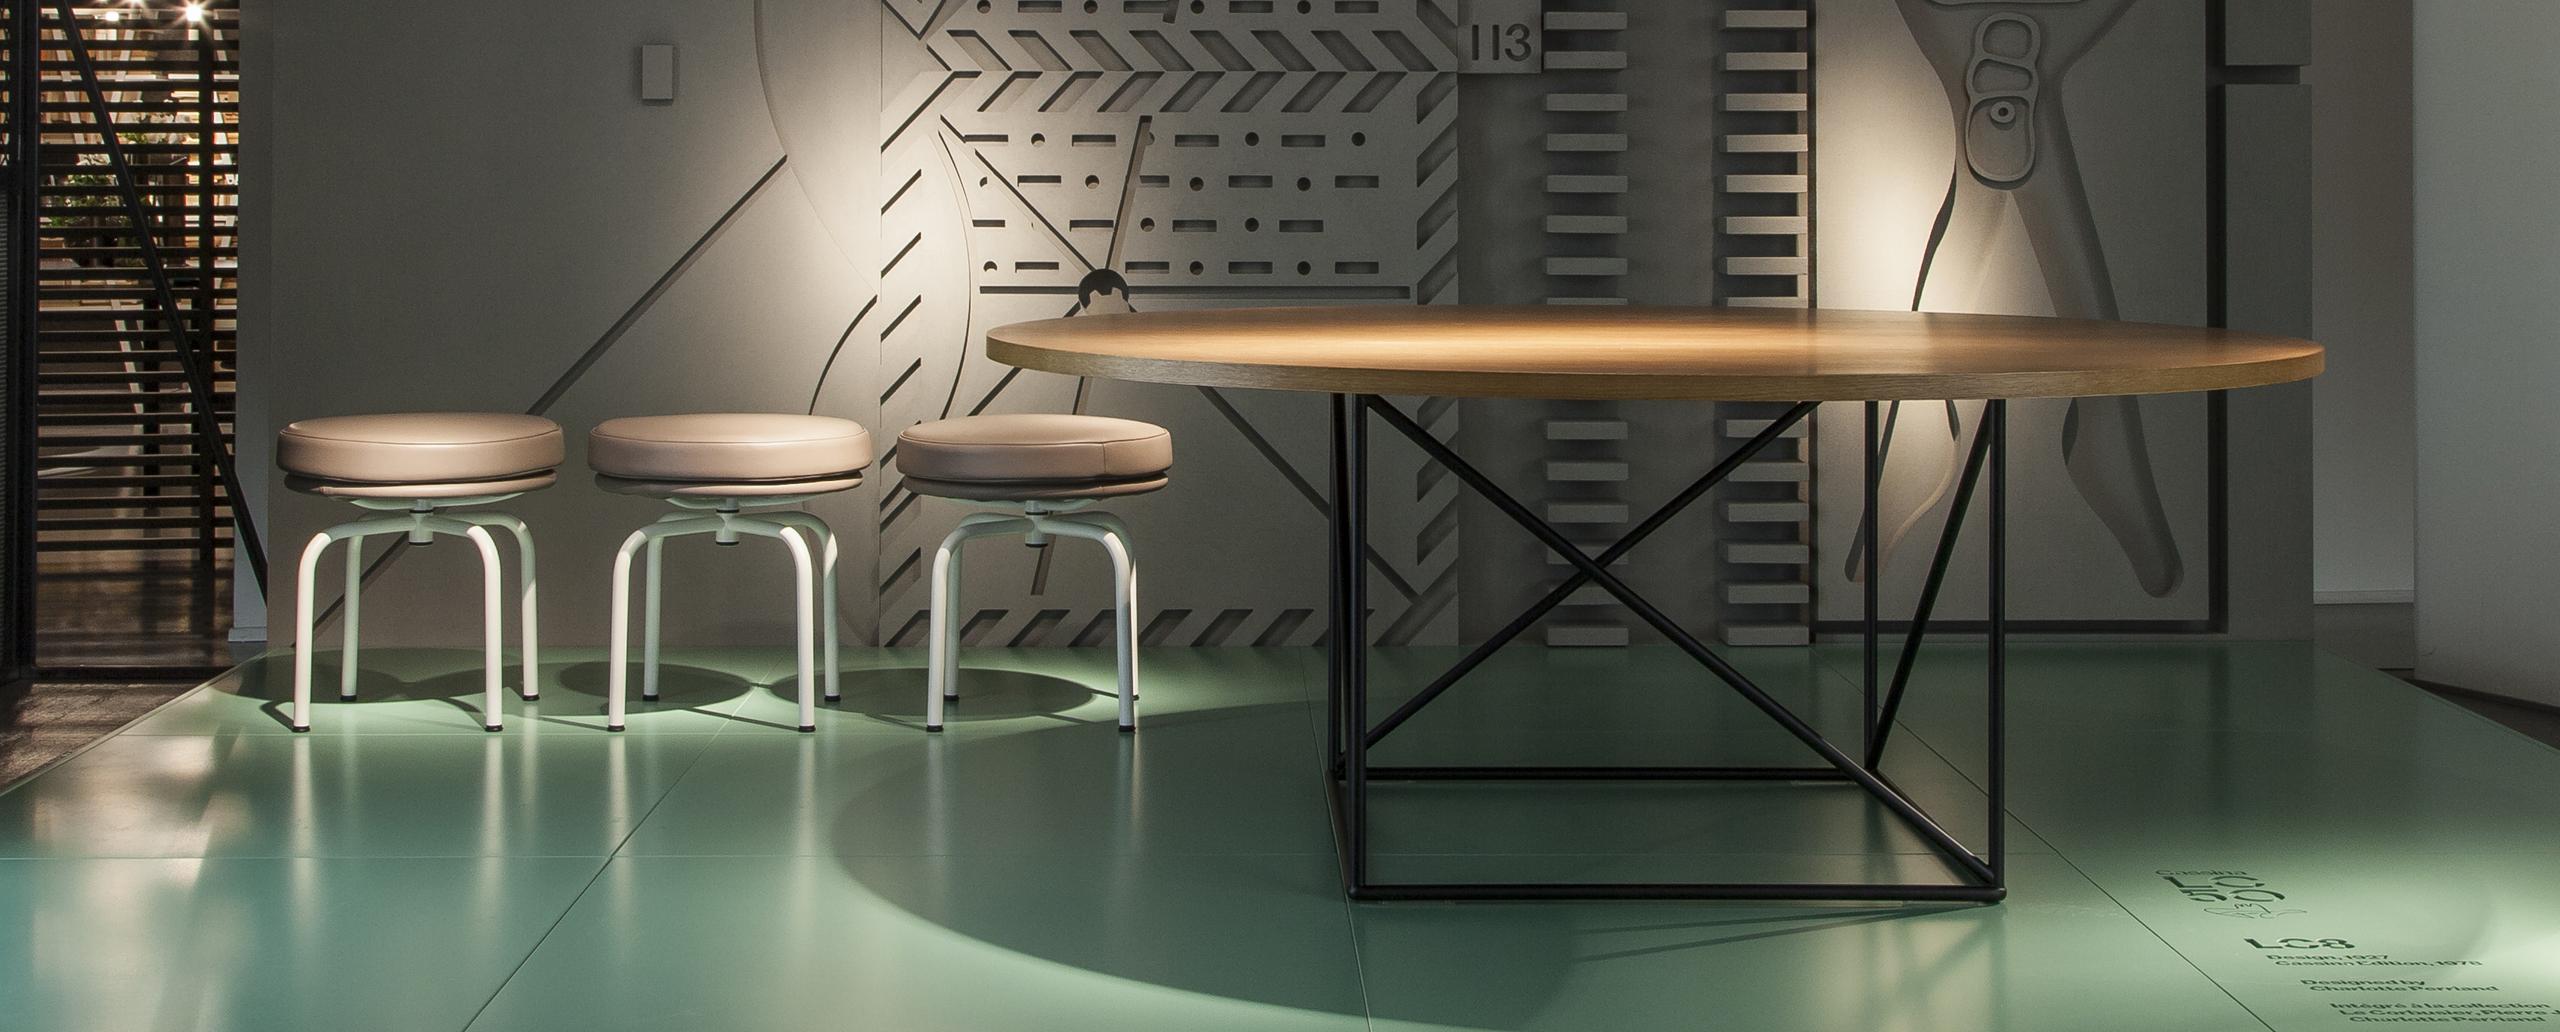 Table designed by Le Corbusier in 1958. Relaunched in 2010.
Manufactured by Cassina in Italy.

Organic and yet rational, this table was designed by Le Corbusier in 1958. Its distinctive construction derives from two geometric figures: the circle,